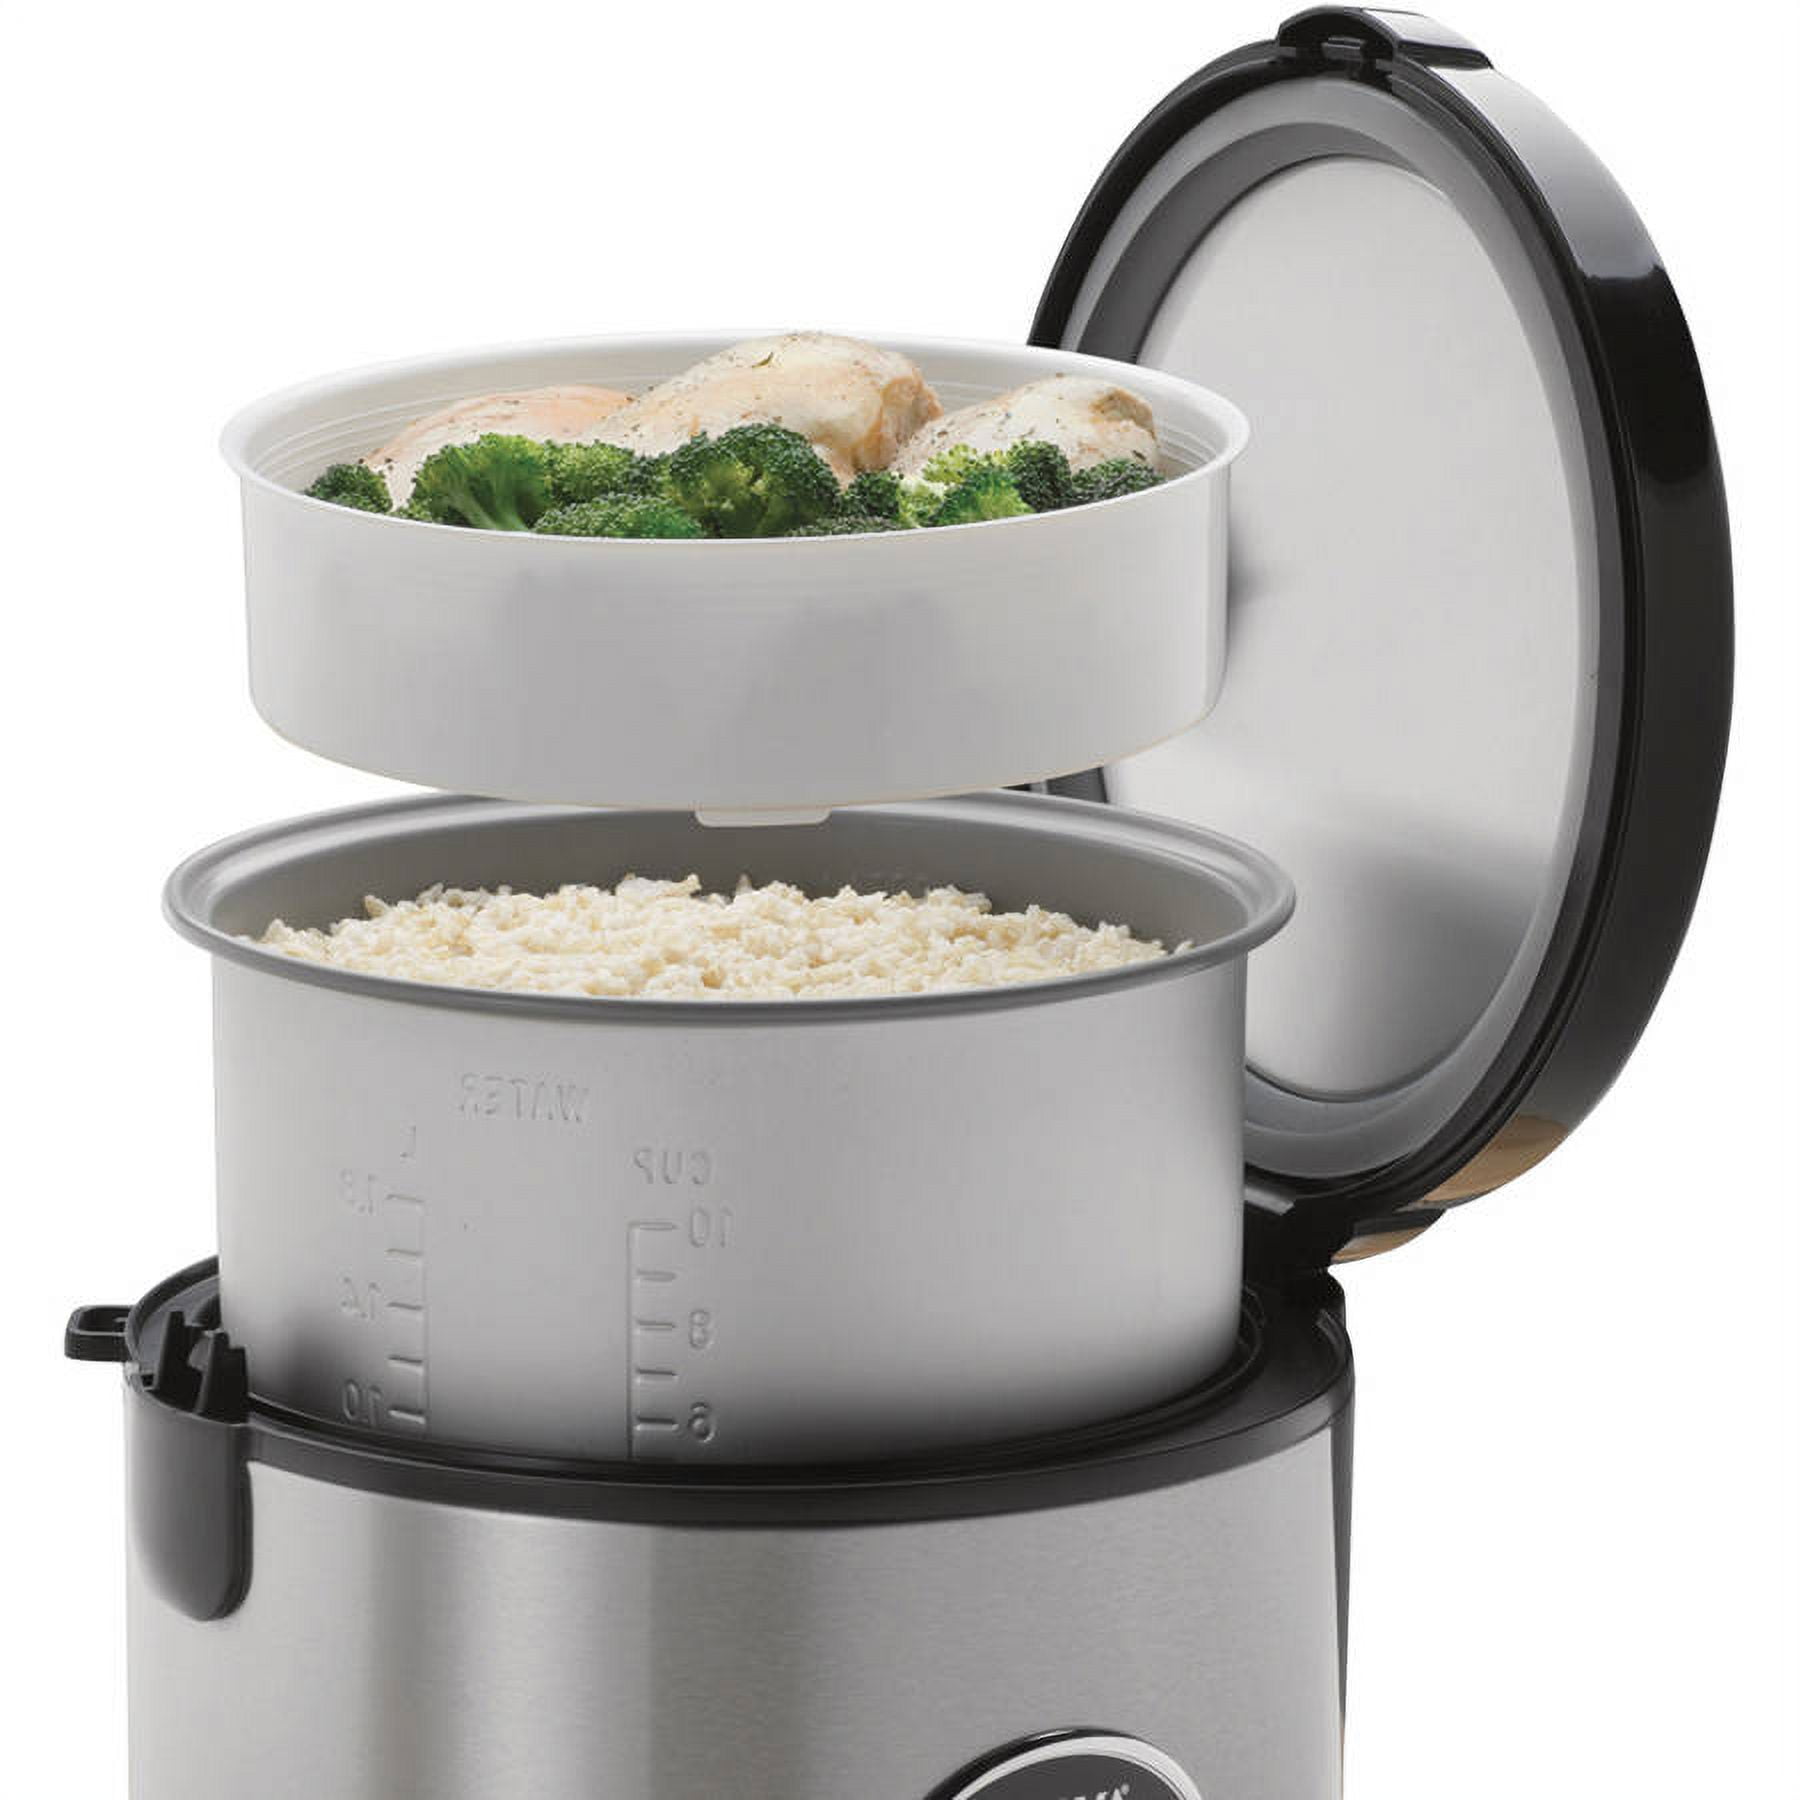 Biddergy - Worldwide Online Auction and Liquidation Services - CLASS A - AROMA  20 Cup Digital Multicooker & Rice Cooker